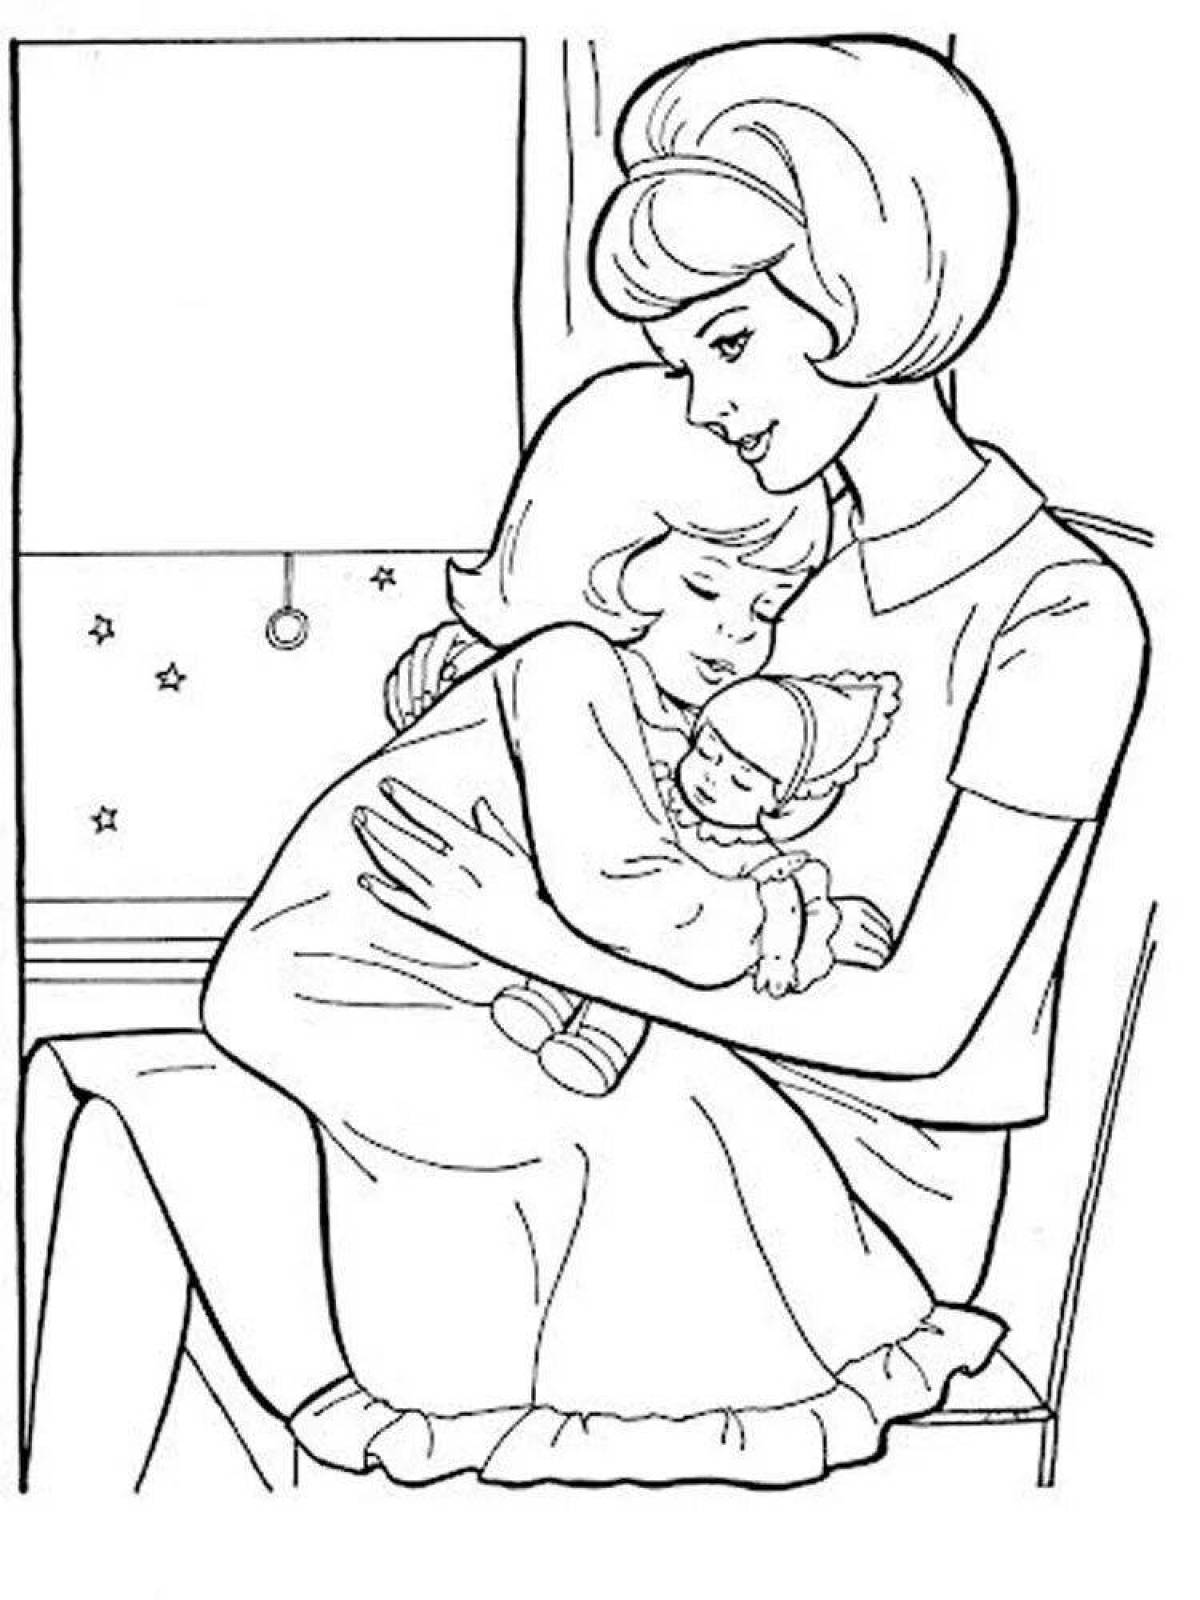 Adorable mom and baby coloring book